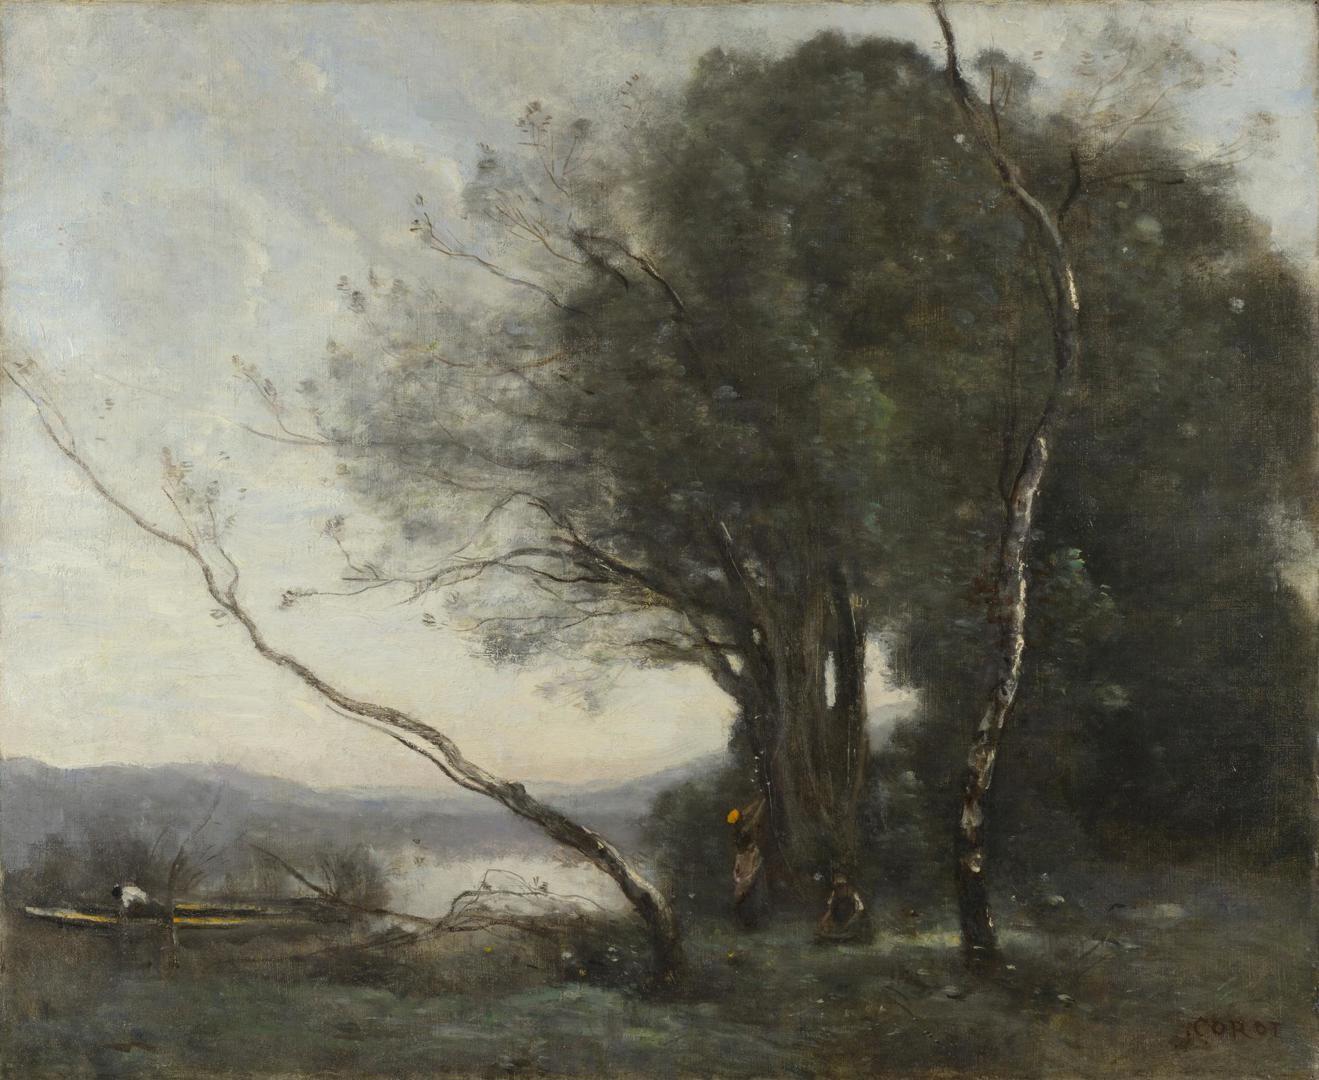 The Leaning Tree Trunk by Jean-Baptiste-Camille Corot